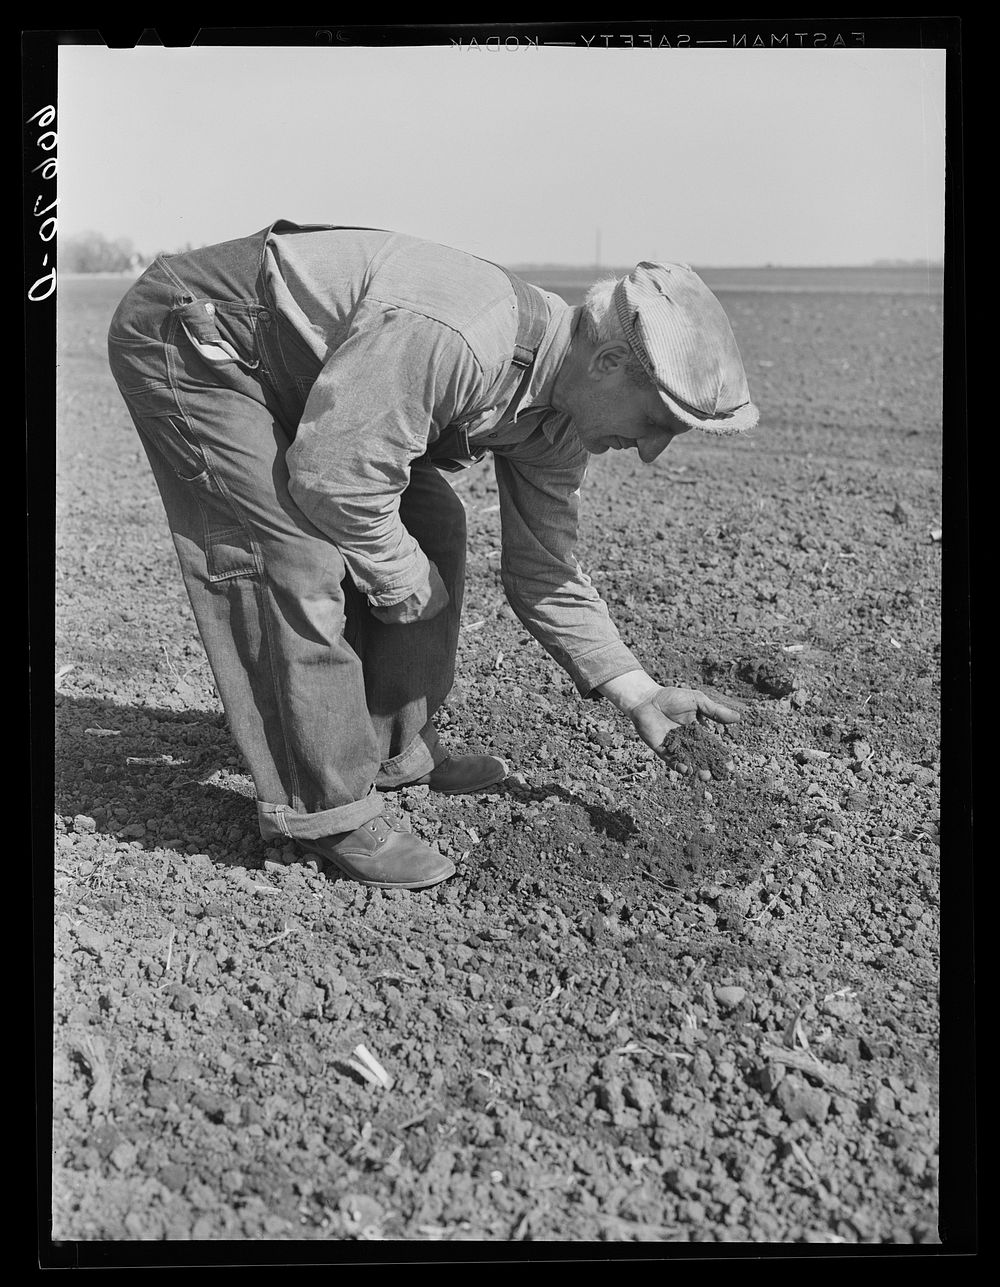 Fred Coulter, Iowa corn farmer, examining soil on his place. Grundy County, Iowa. Sourced from the Library of Congress.